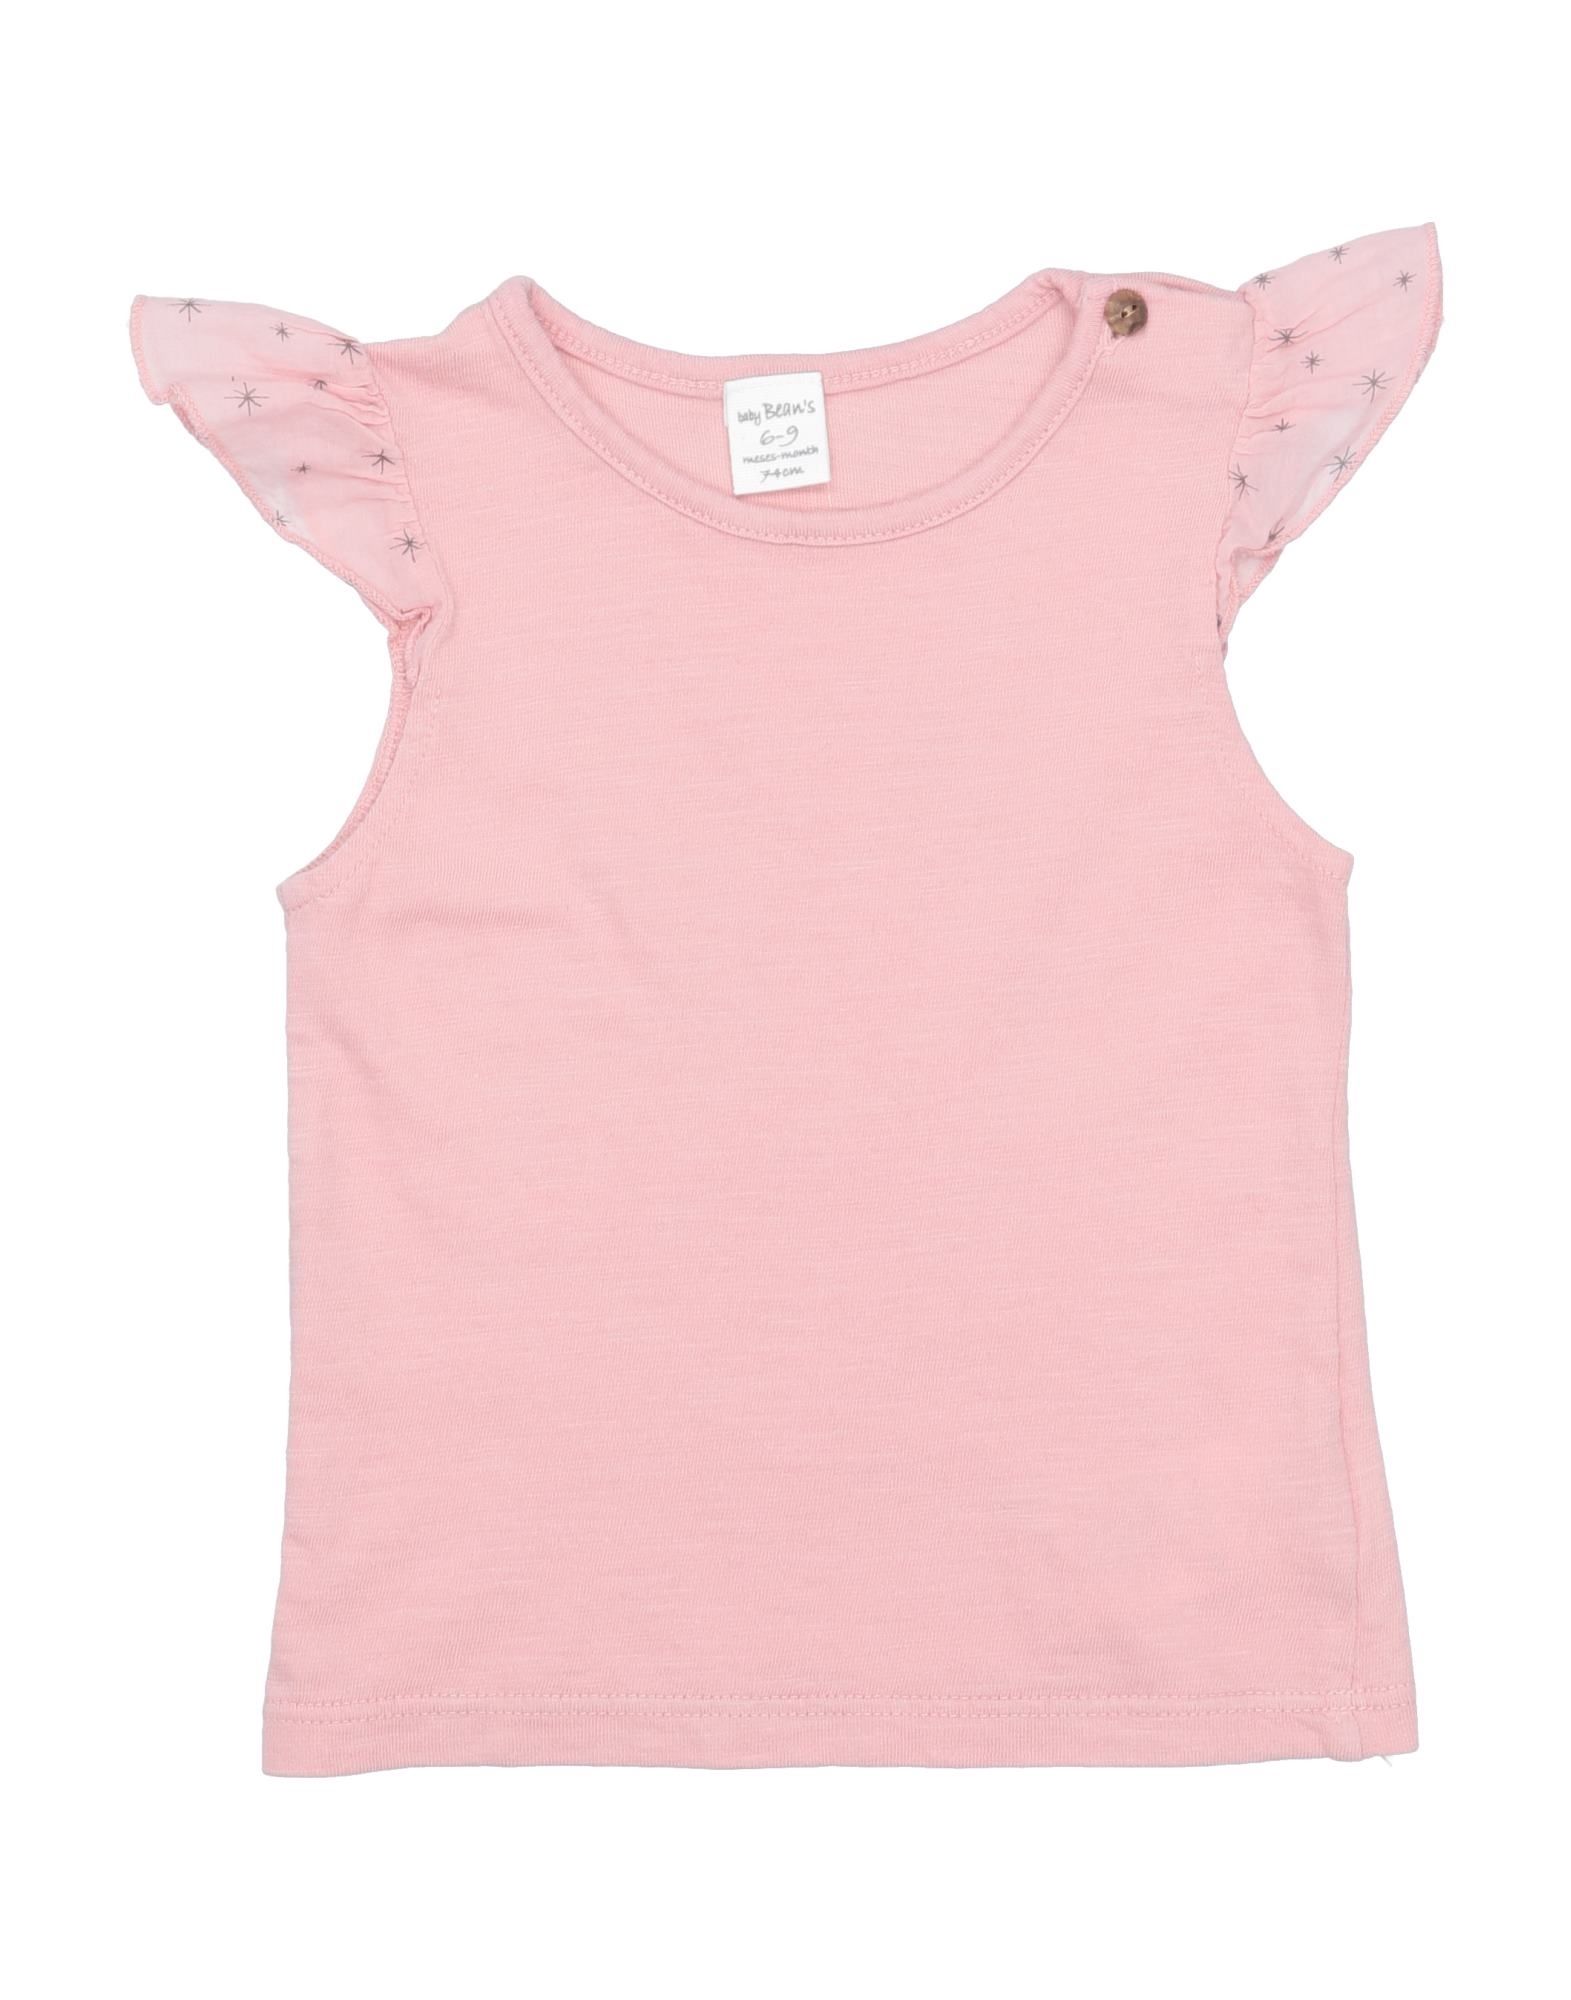 Bean's Kids' T-shirts In Pink